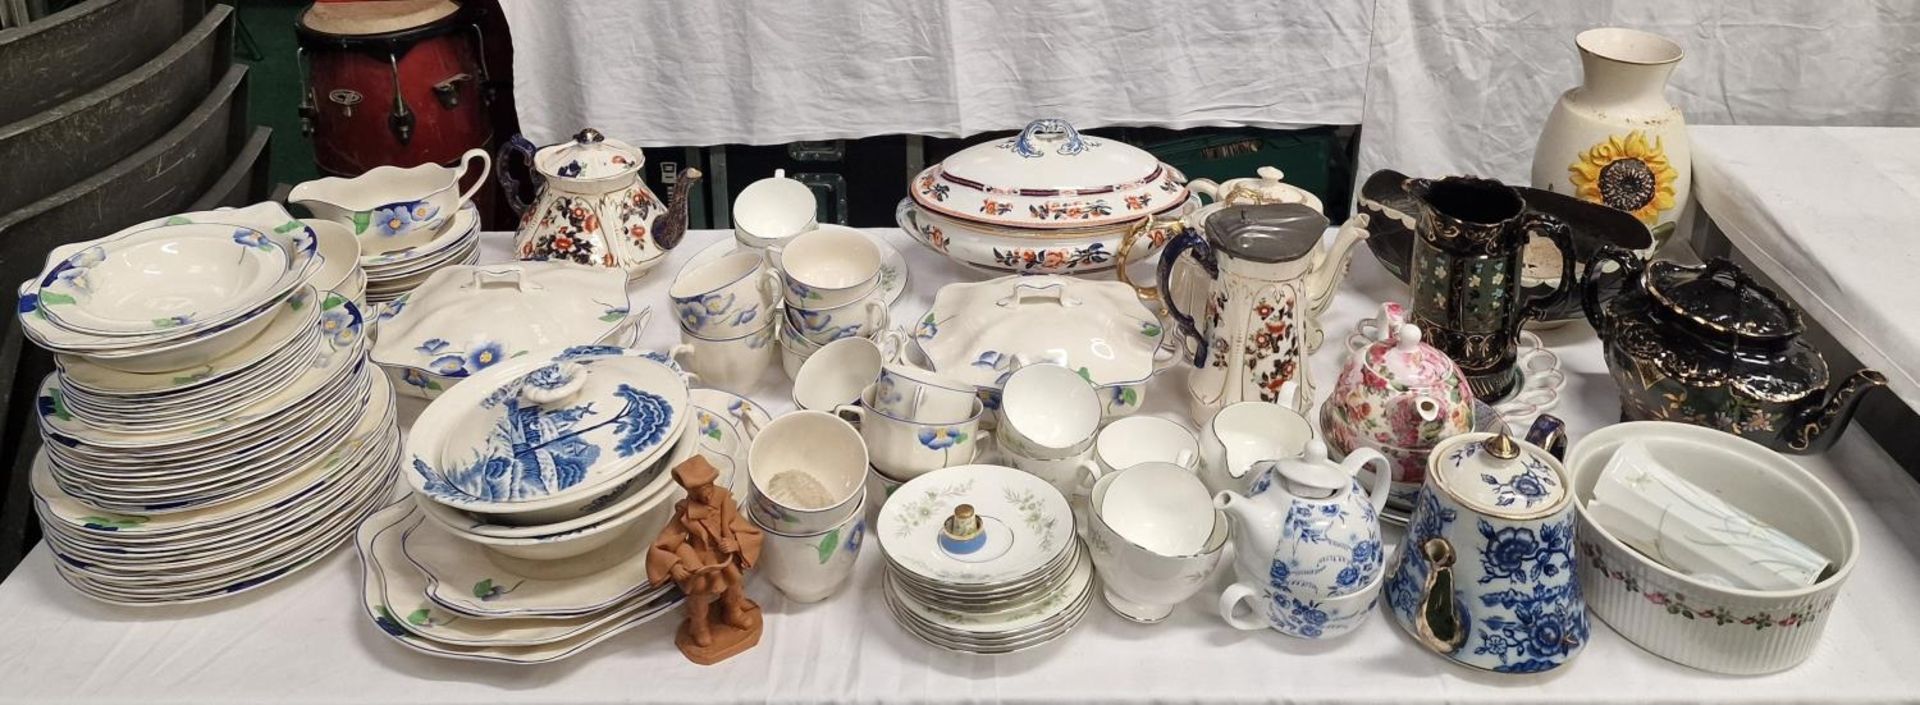 Very large collection of miscellaneous chinaware items.